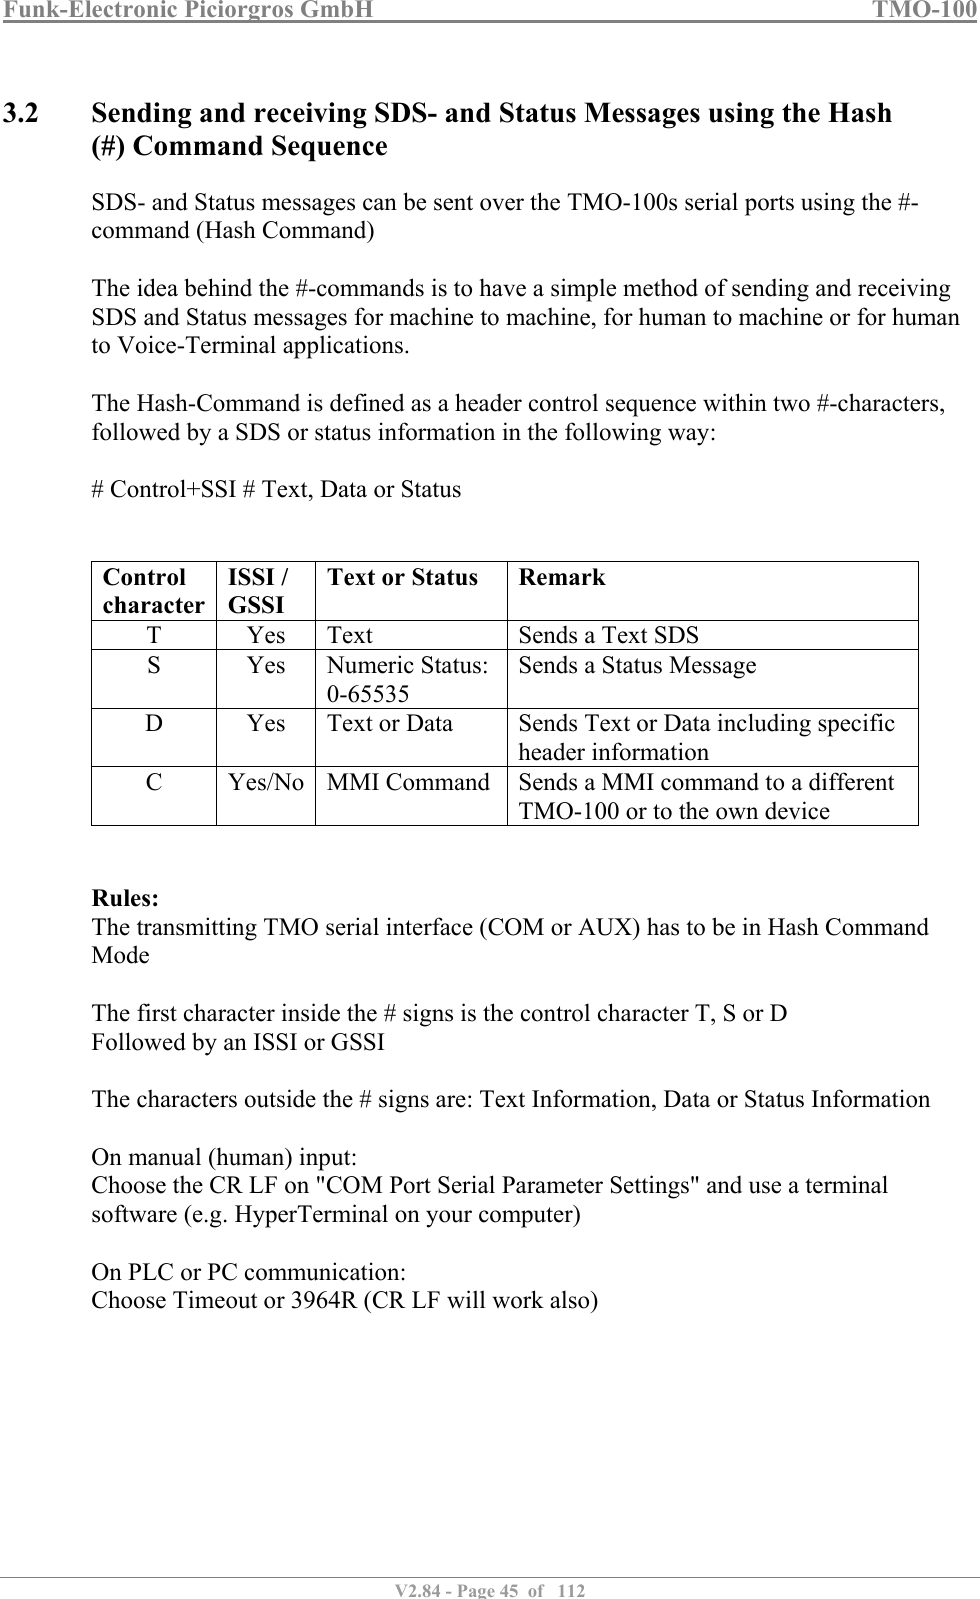 Funk-Electronic Piciorgros GmbH   TMO-100   V2.84 - Page 45  of   112   3.2 Sending and receiving SDS- and Status Messages using the Hash (#) Command Sequence SDS- and Status messages can be sent over the TMO-100s serial ports using the #-command (Hash Command)  The idea behind the #-commands is to have a simple method of sending and receiving SDS and Status messages for machine to machine, for human to machine or for human to Voice-Terminal applications.  The Hash-Command is defined as a header control sequence within two #-characters, followed by a SDS or status information in the following way:  # Control+SSI # Text, Data or Status   Control  character ISSI / GSSI Text or Status  Remark T  Yes  Text  Sends a Text SDS S  Yes  Numeric Status: 0-65535 Sends a Status Message D  Yes  Text or Data  Sends Text or Data including specific header information C  Yes/No  MMI Command  Sends a MMI command to a different TMO-100 or to the own device   Rules: The transmitting TMO serial interface (COM or AUX) has to be in Hash Command Mode  The first character inside the # signs is the control character T, S or D Followed by an ISSI or GSSI  The characters outside the # signs are: Text Information, Data or Status Information  On manual (human) input:  Choose the CR LF on &quot;COM Port Serial Parameter Settings&quot; and use a terminal software (e.g. HyperTerminal on your computer)  On PLC or PC communication:  Choose Timeout or 3964R (CR LF will work also)  